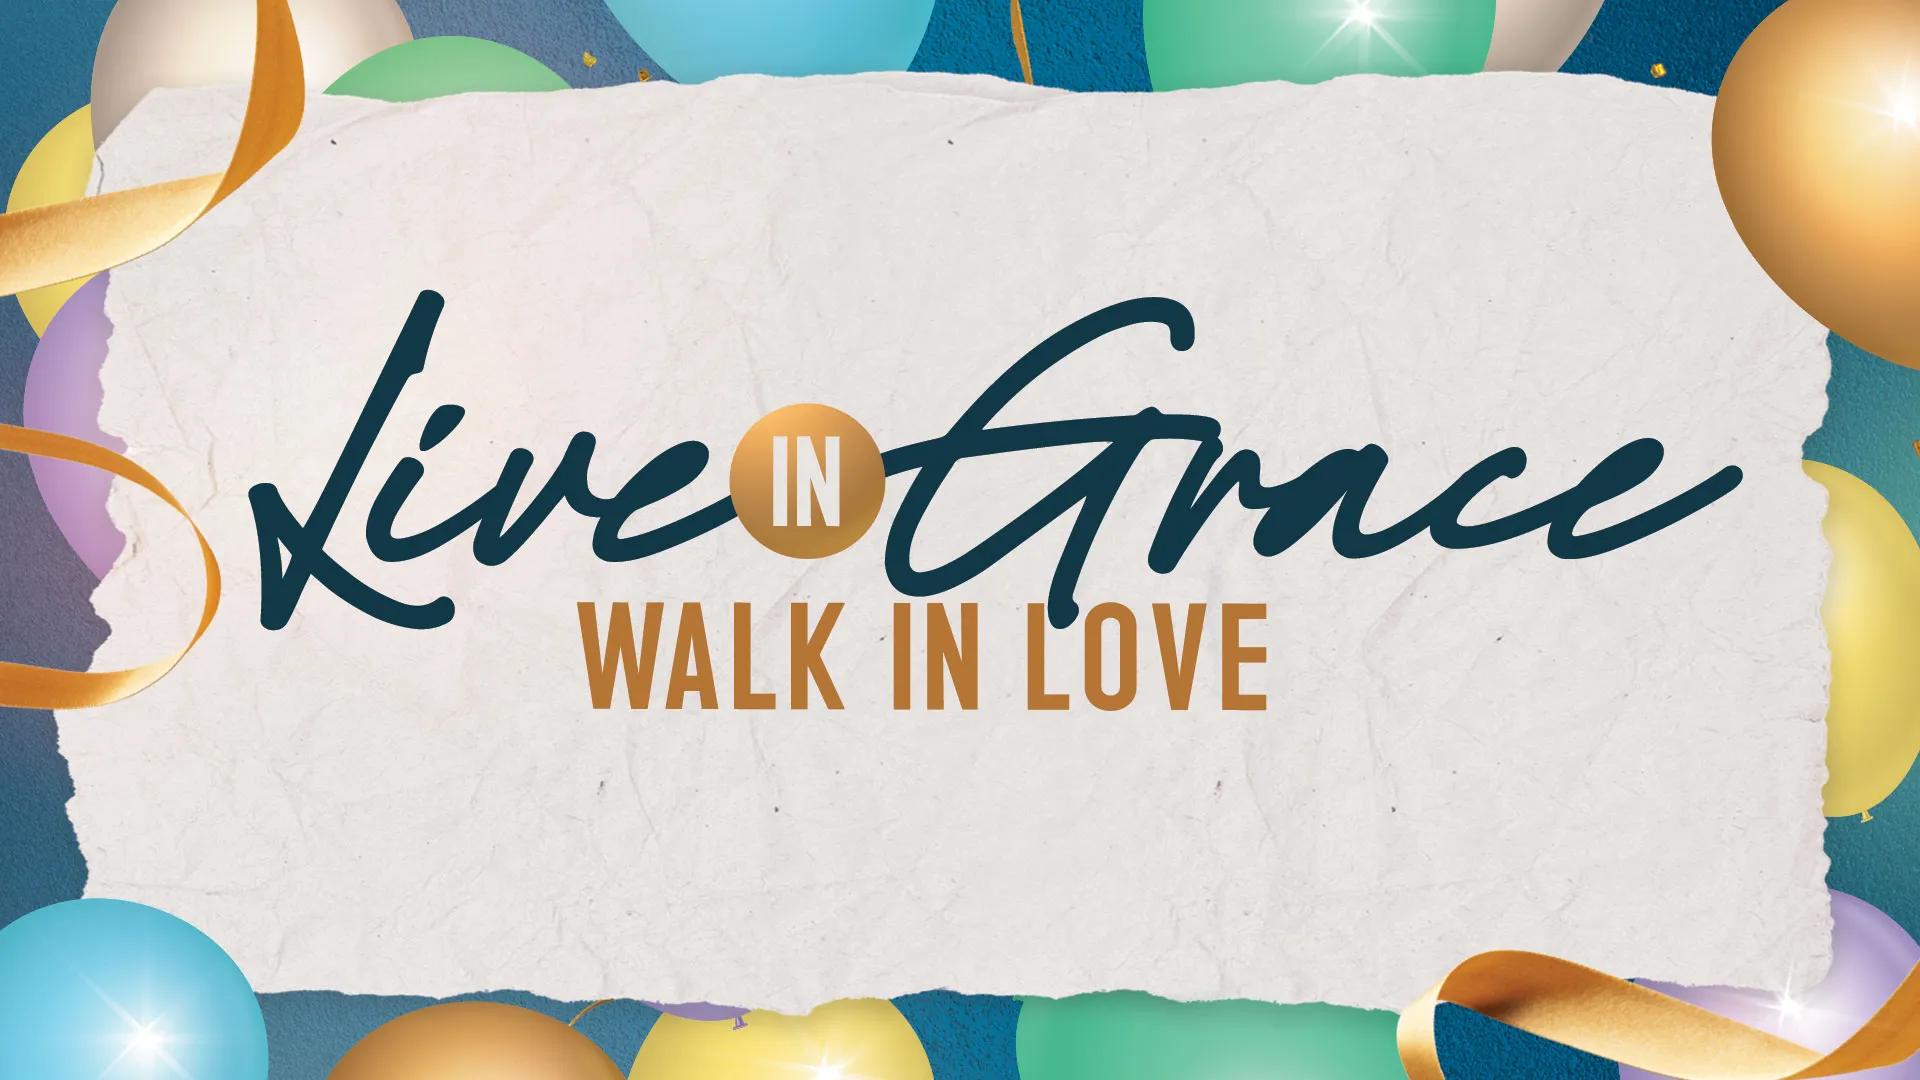 A backdrop full of balloons with the words "live in grace, walk in love" written on a paper-like background.